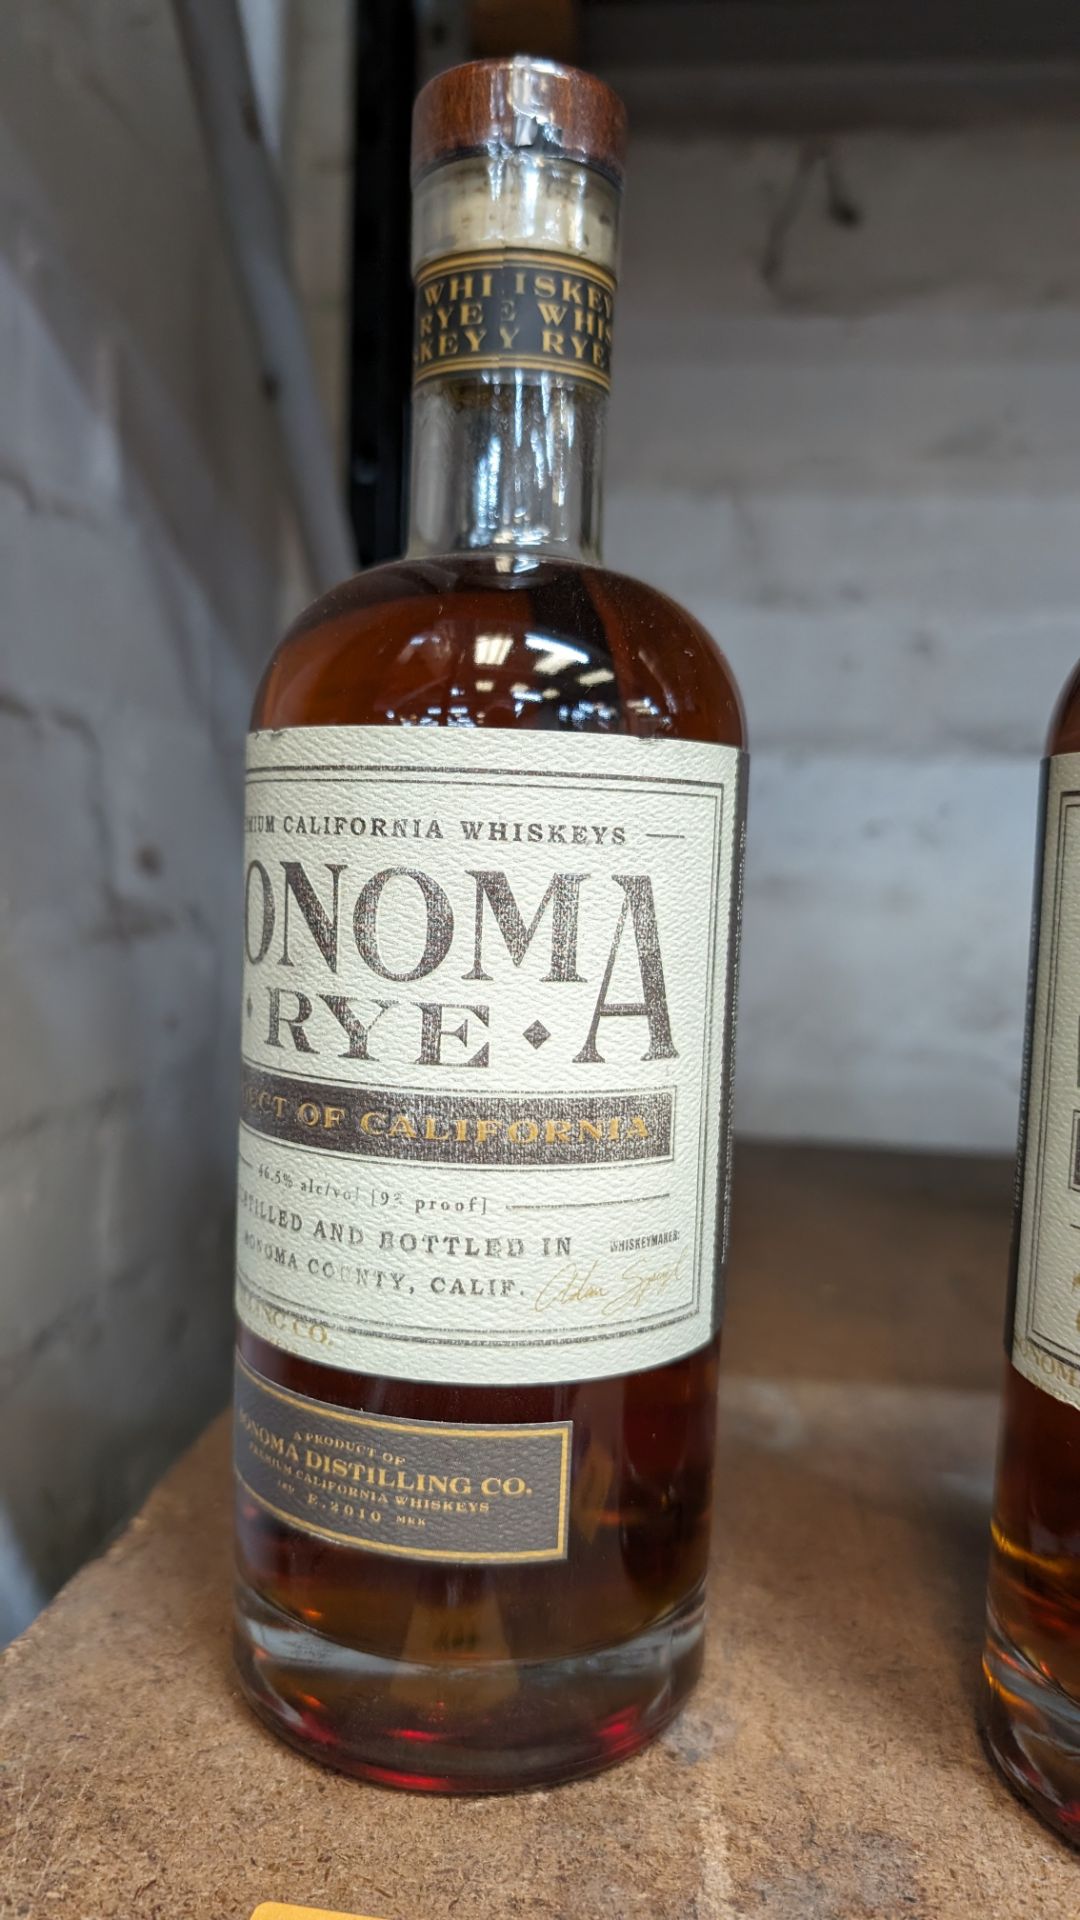 1 off 700ml bottle of Sonoma Rye Whiskey. 46.5% alc/vol (93 proof). Distilled and bottled in Sonom - Image 2 of 8